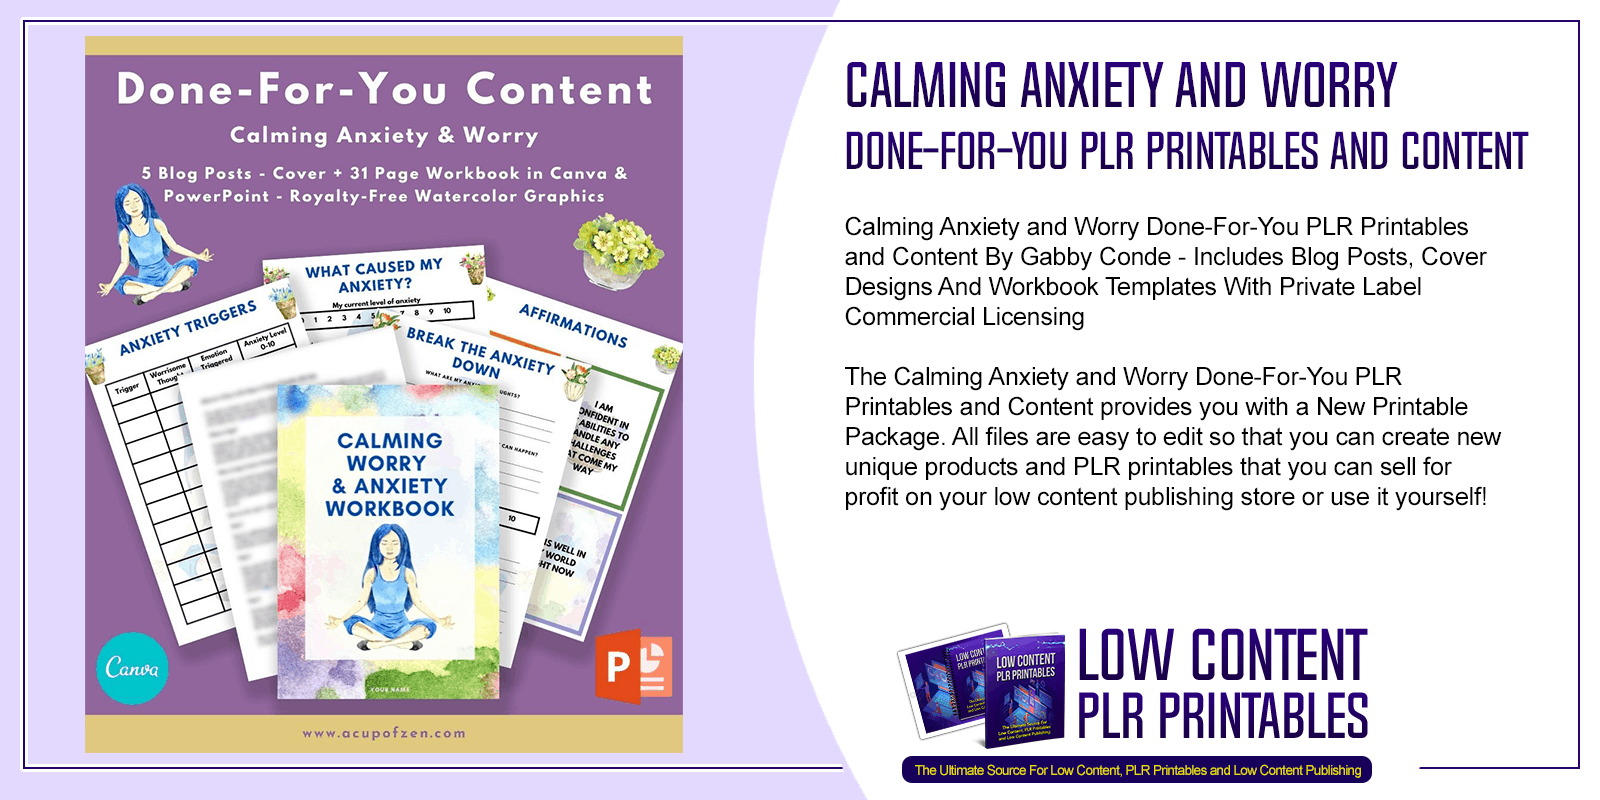 Calming Anxiety and Worry Done For You PLR Printables and Content